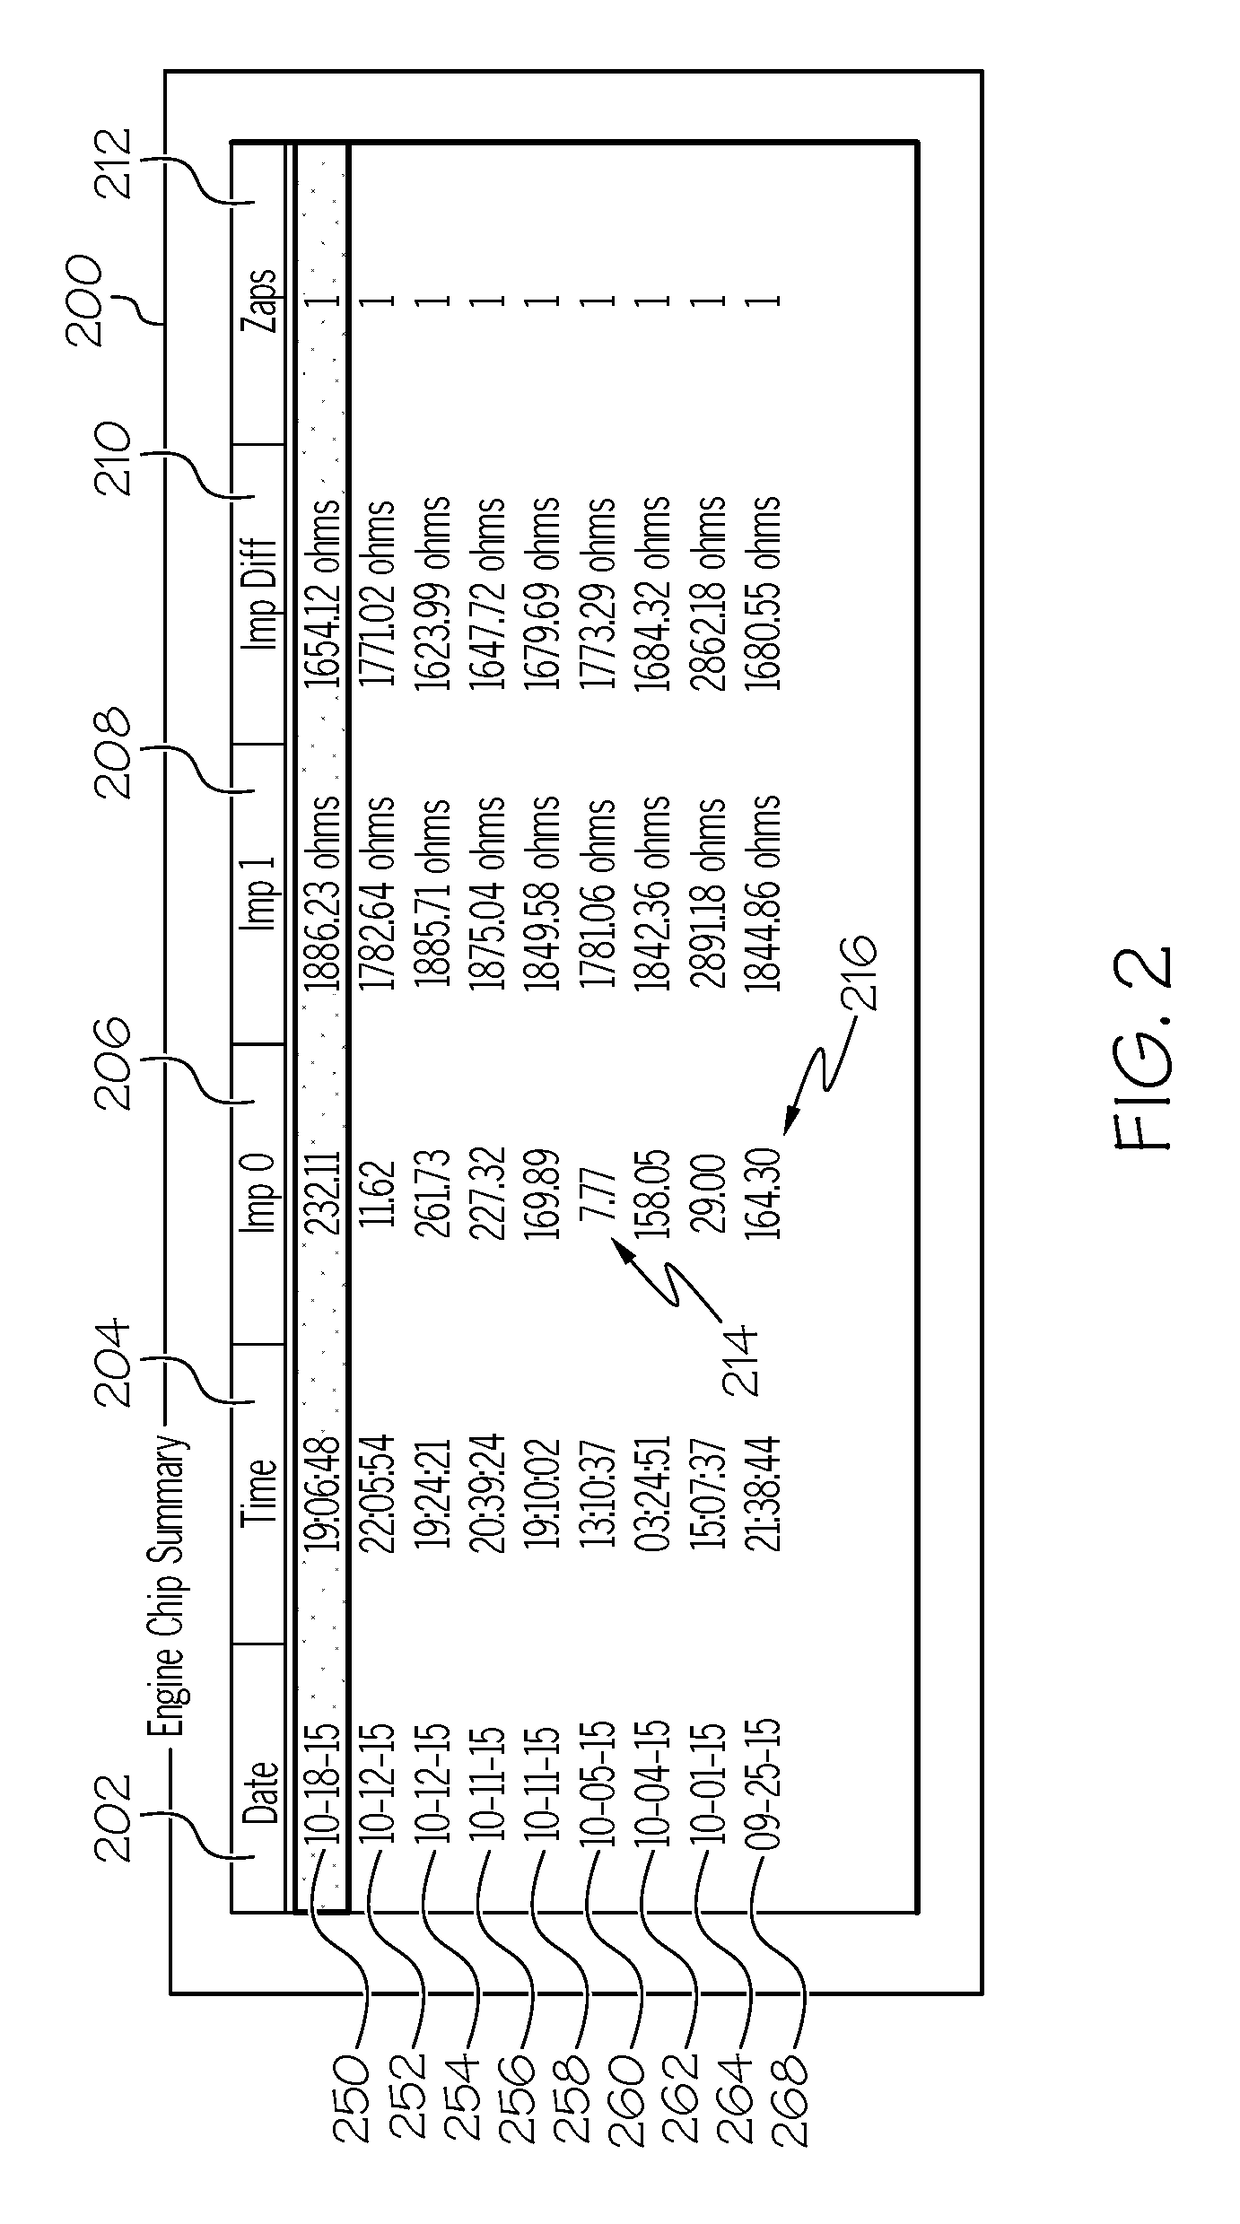 System and method for evaluating chip zap data